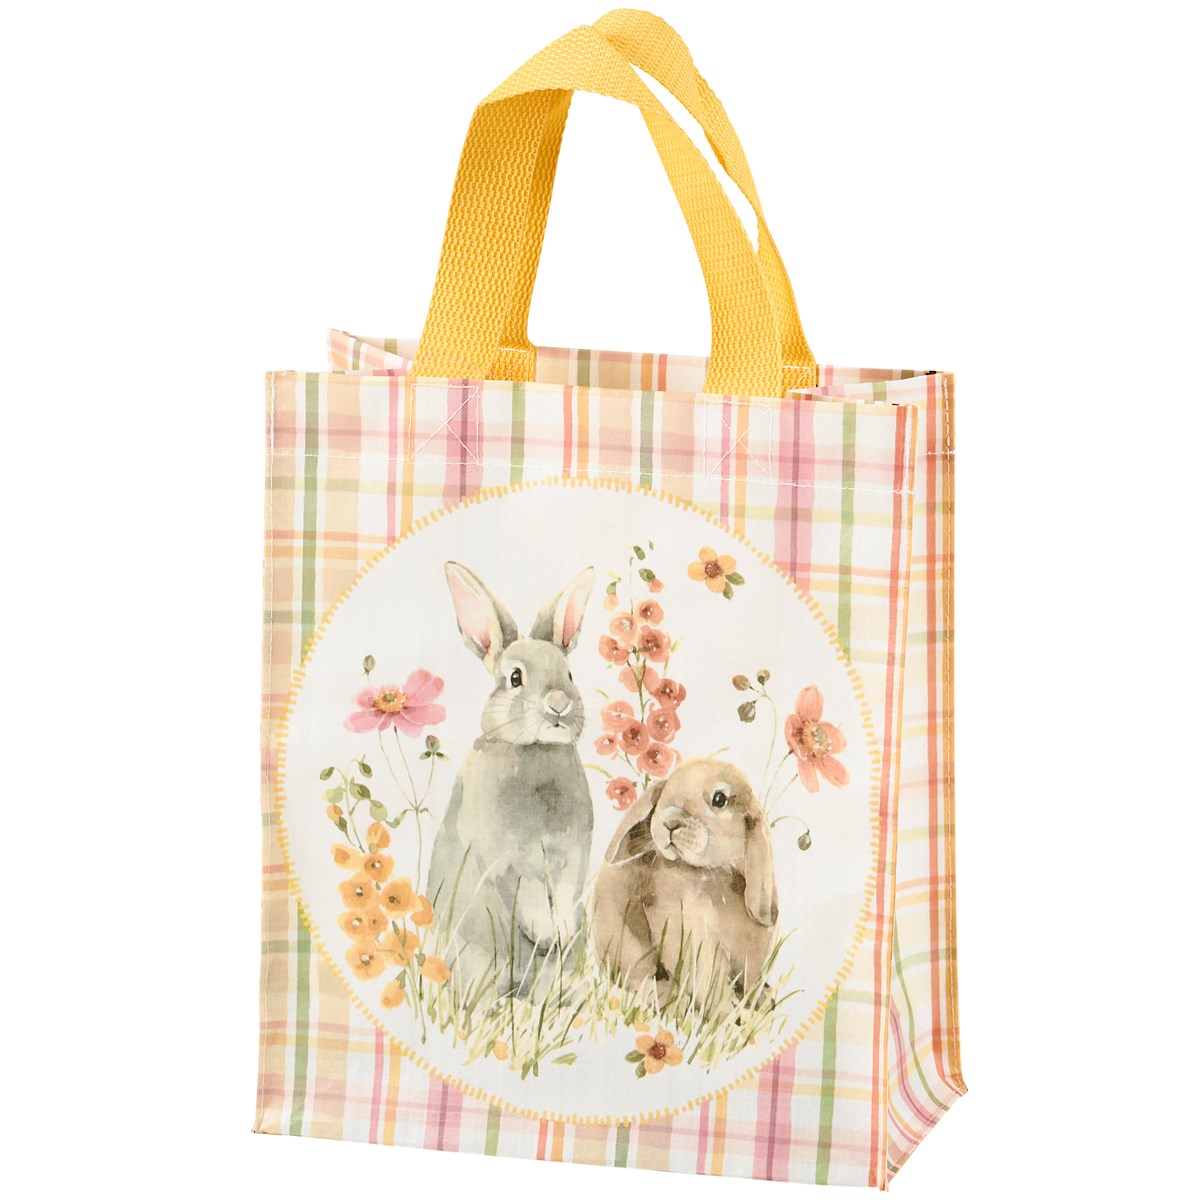 Flower Bunnies Daily Tote - Post-Consumer Material, Nylon